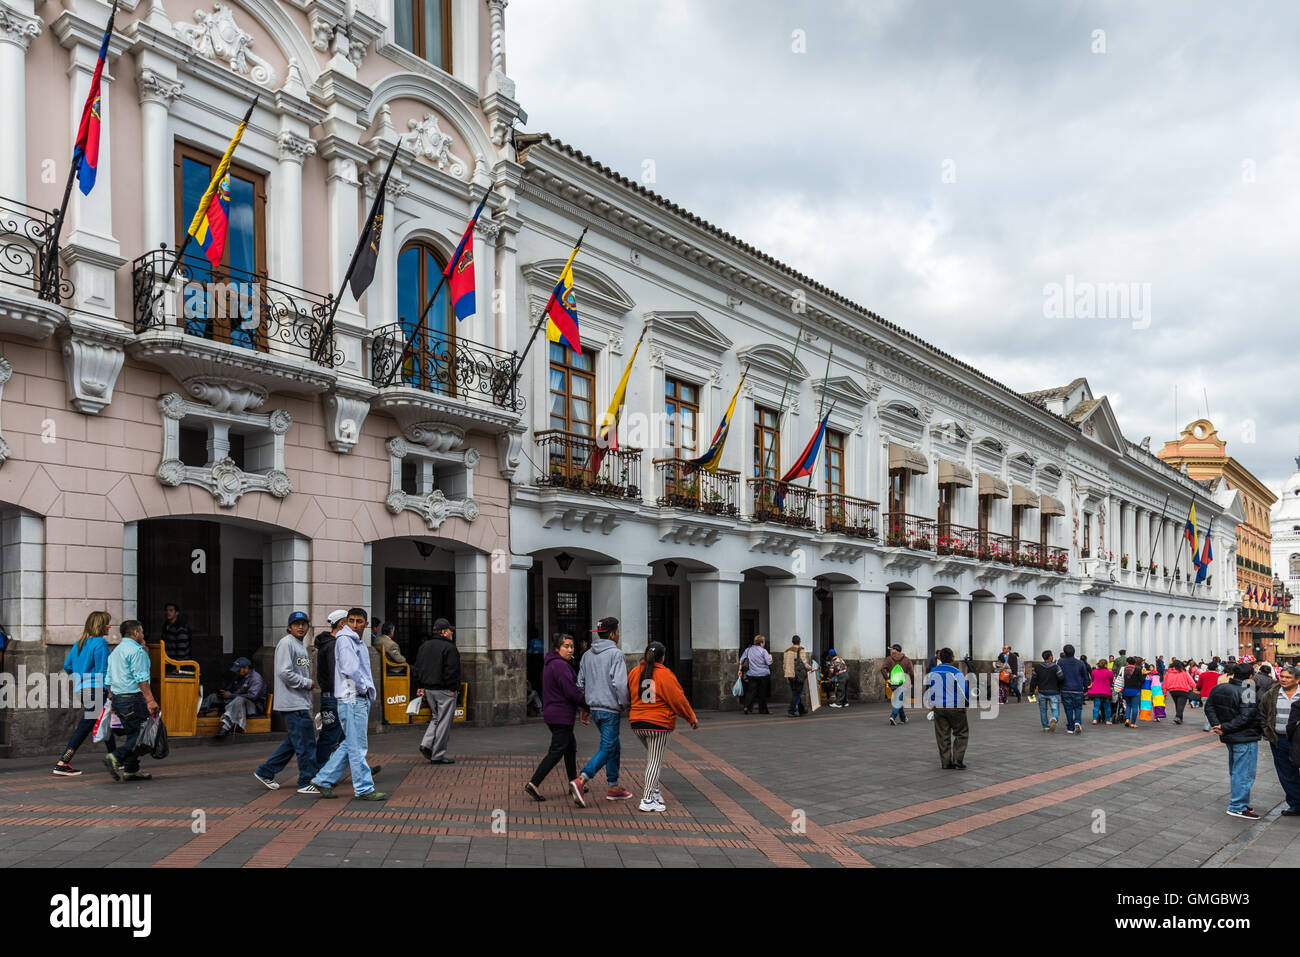 Palacio de Carondelet, the Presidential palace, by the Independence Square in old city Quito, Ecuador. Stock Photo